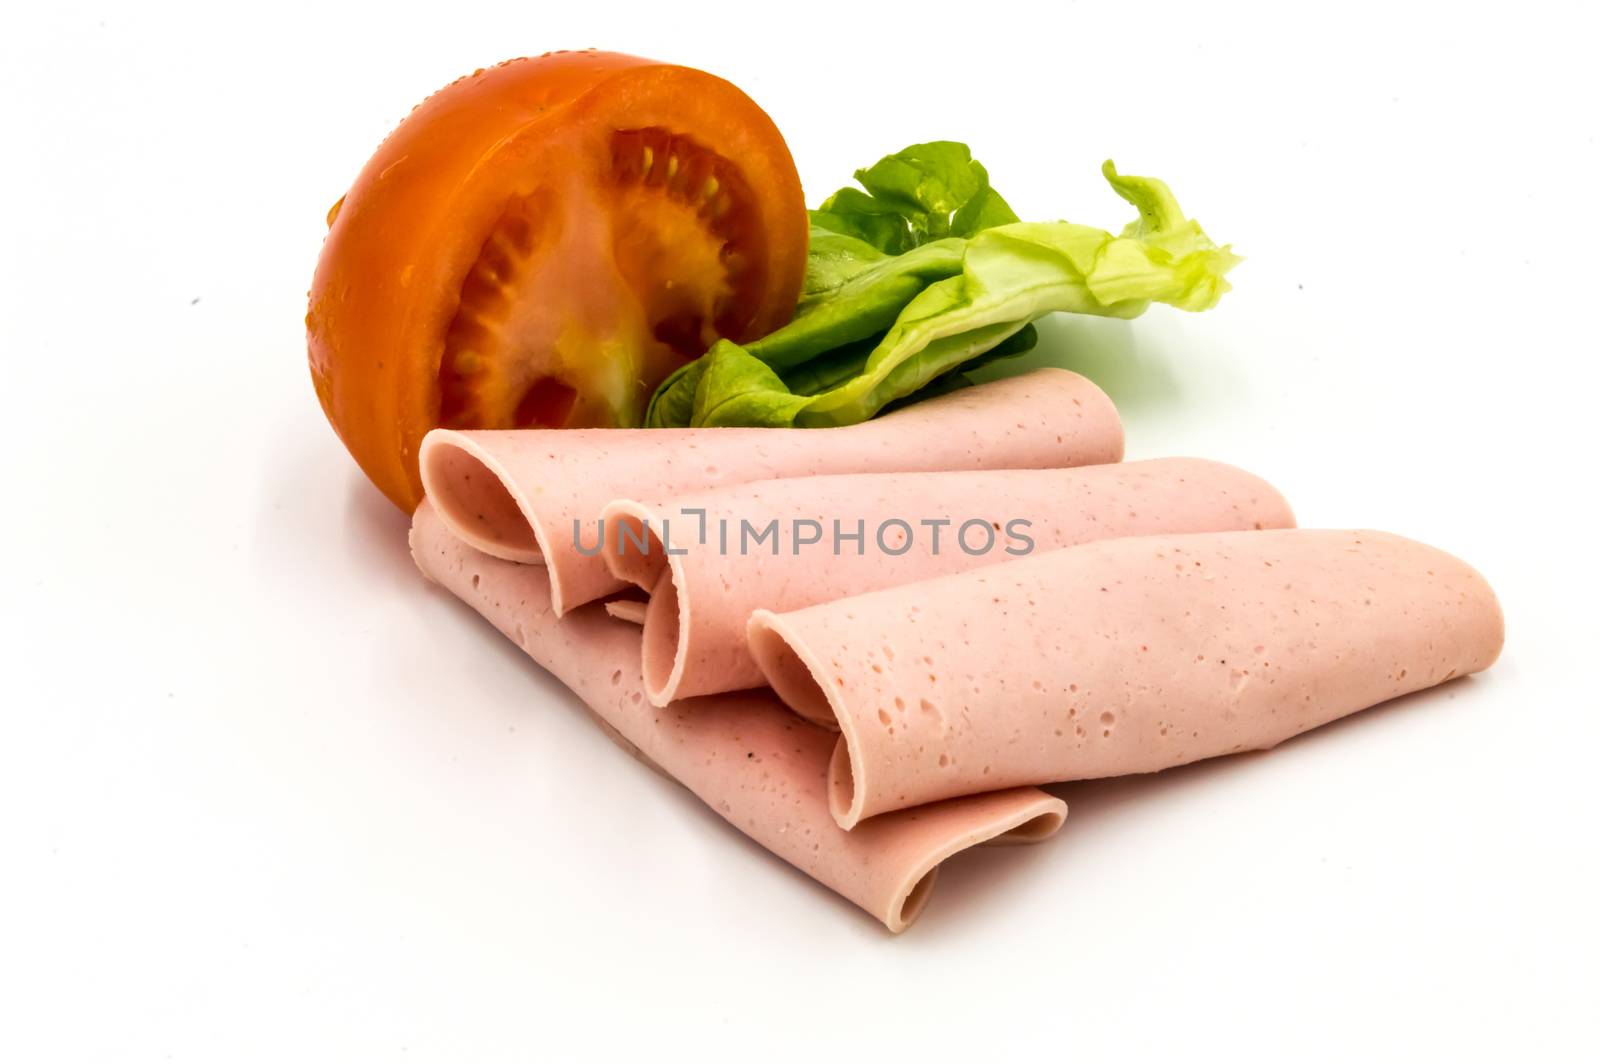 Slice of ham or Paris sausage on a white background with half a tomato and a salad leaf